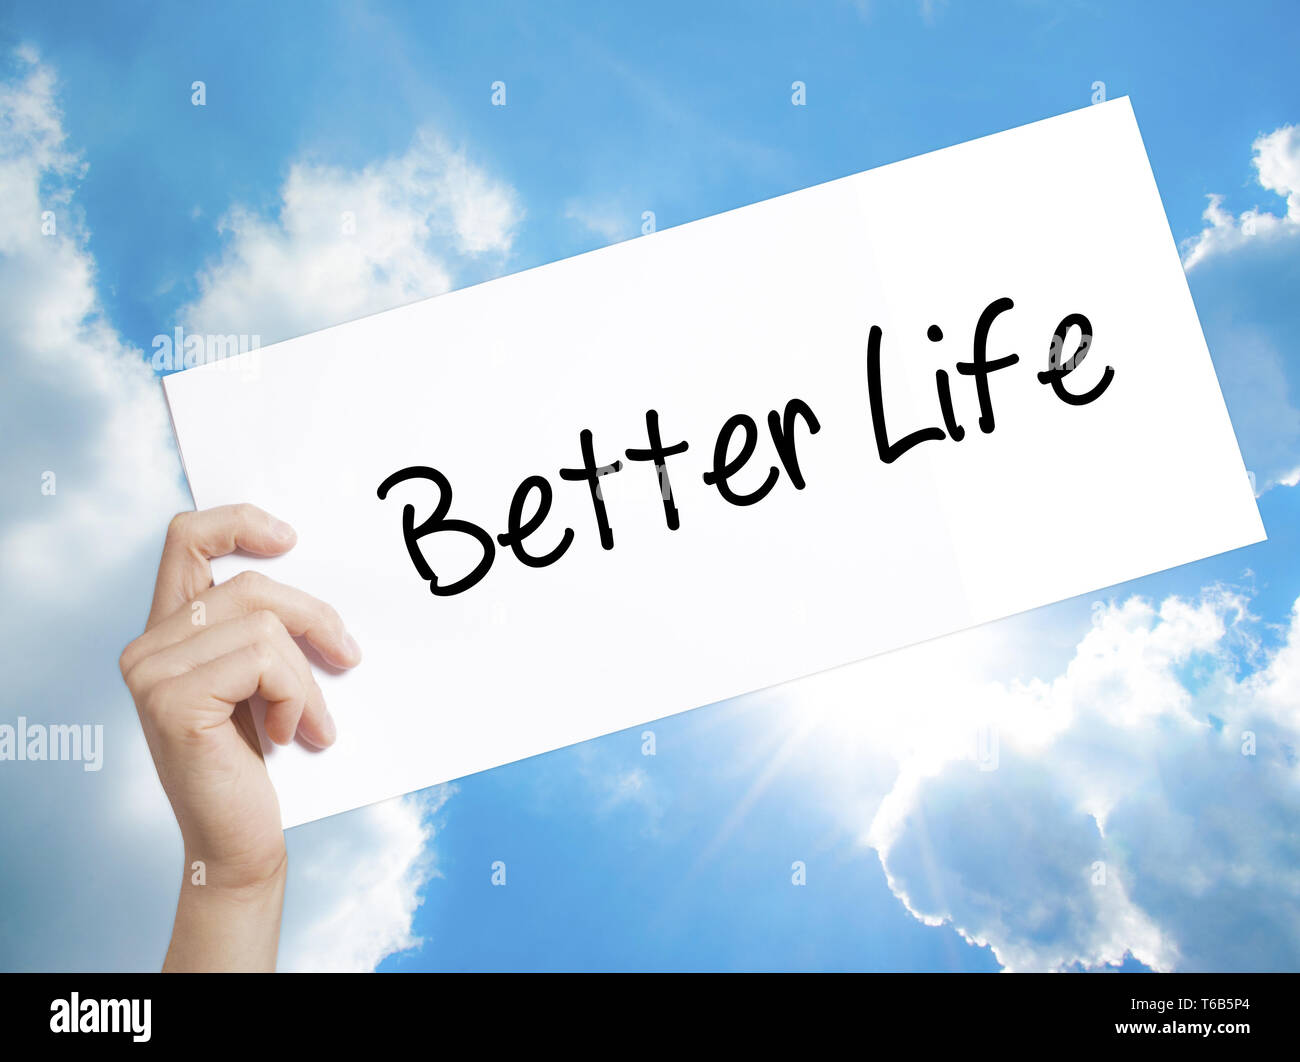 https://c8.alamy.com/comp/T6B5P4/better-life-sign-on-white-paper-man-hand-holding-paper-with-text-isolated-on-sky-background-T6B5P4.jpg